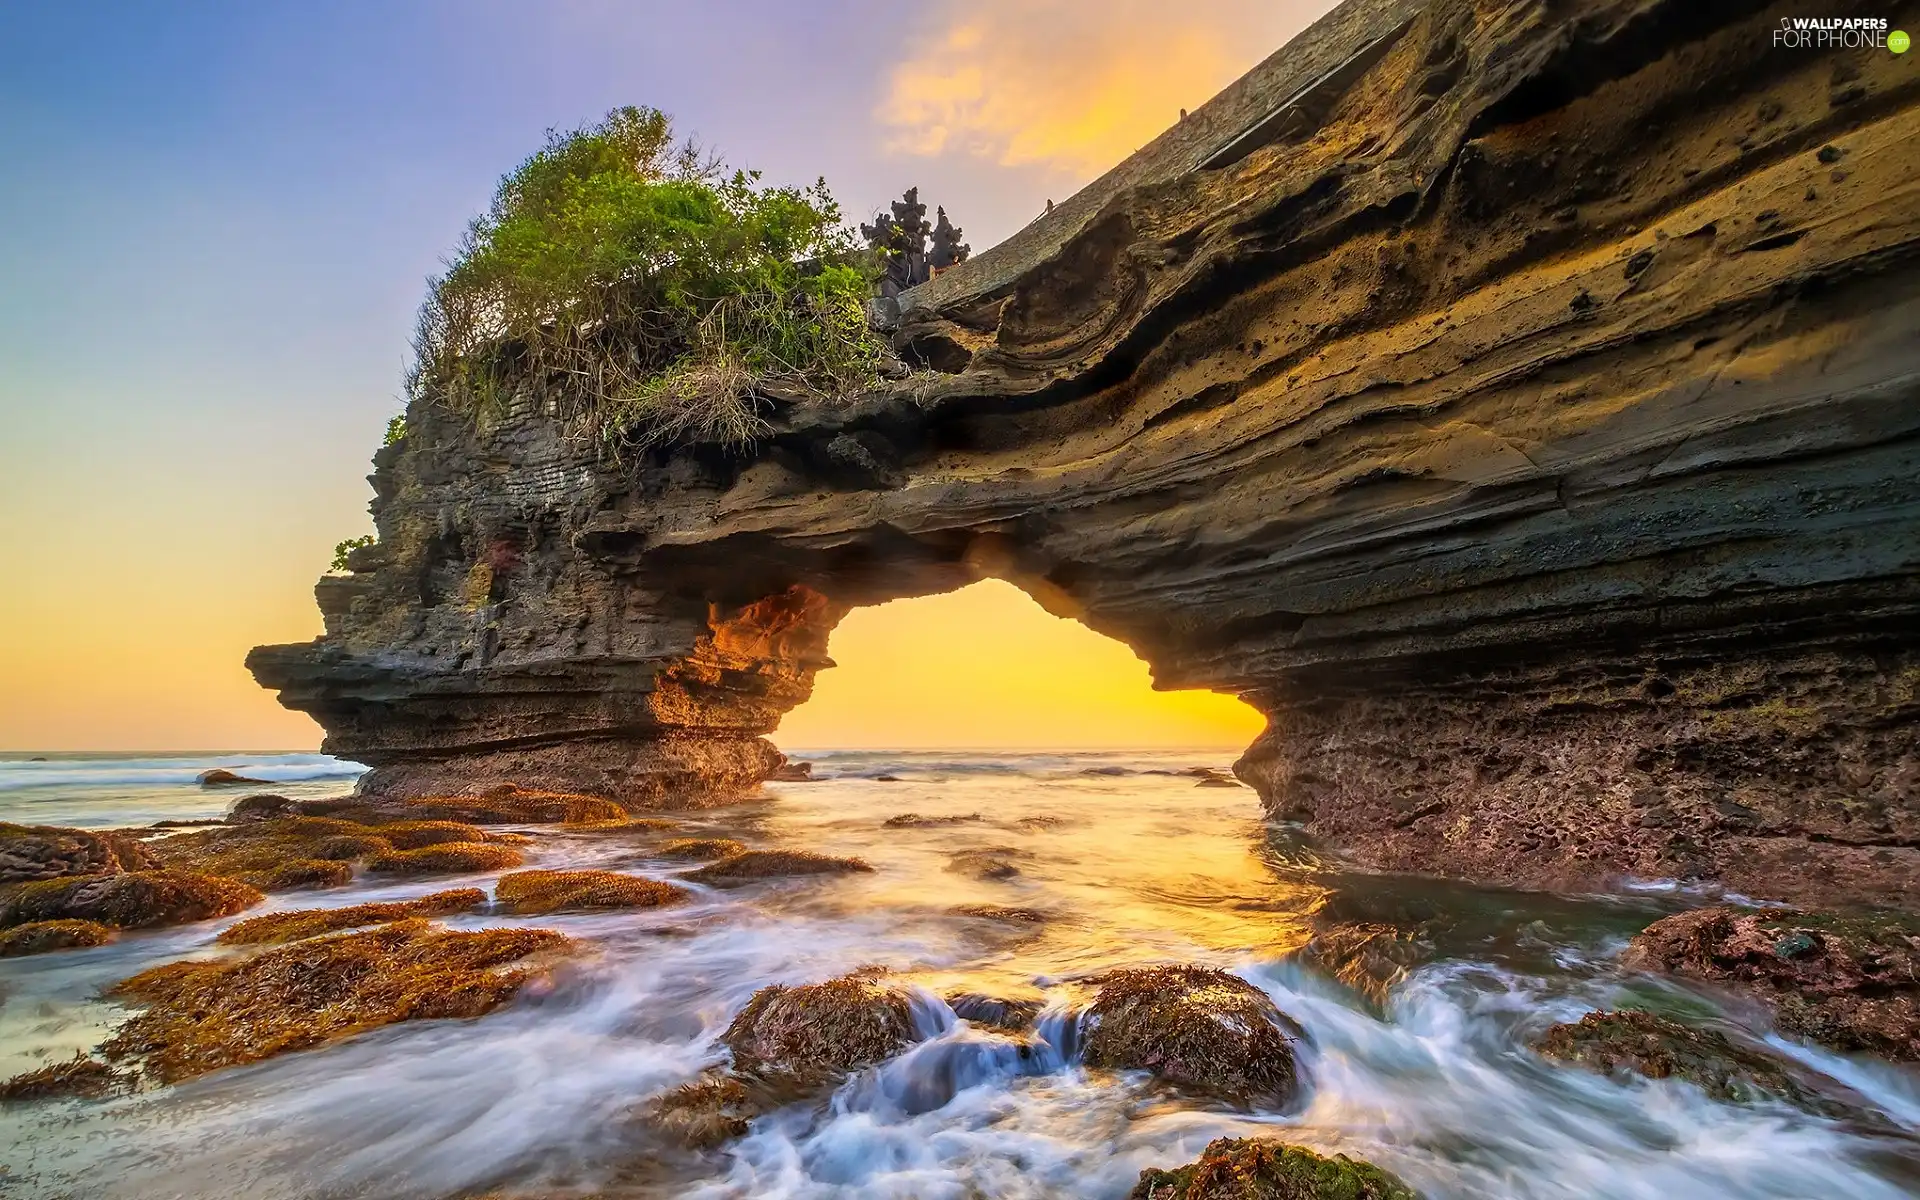 viewes, Bali Island, Rocks, Stones, Bow, indonesia, Tanah Lot, Great Sunsets, mossy, trees